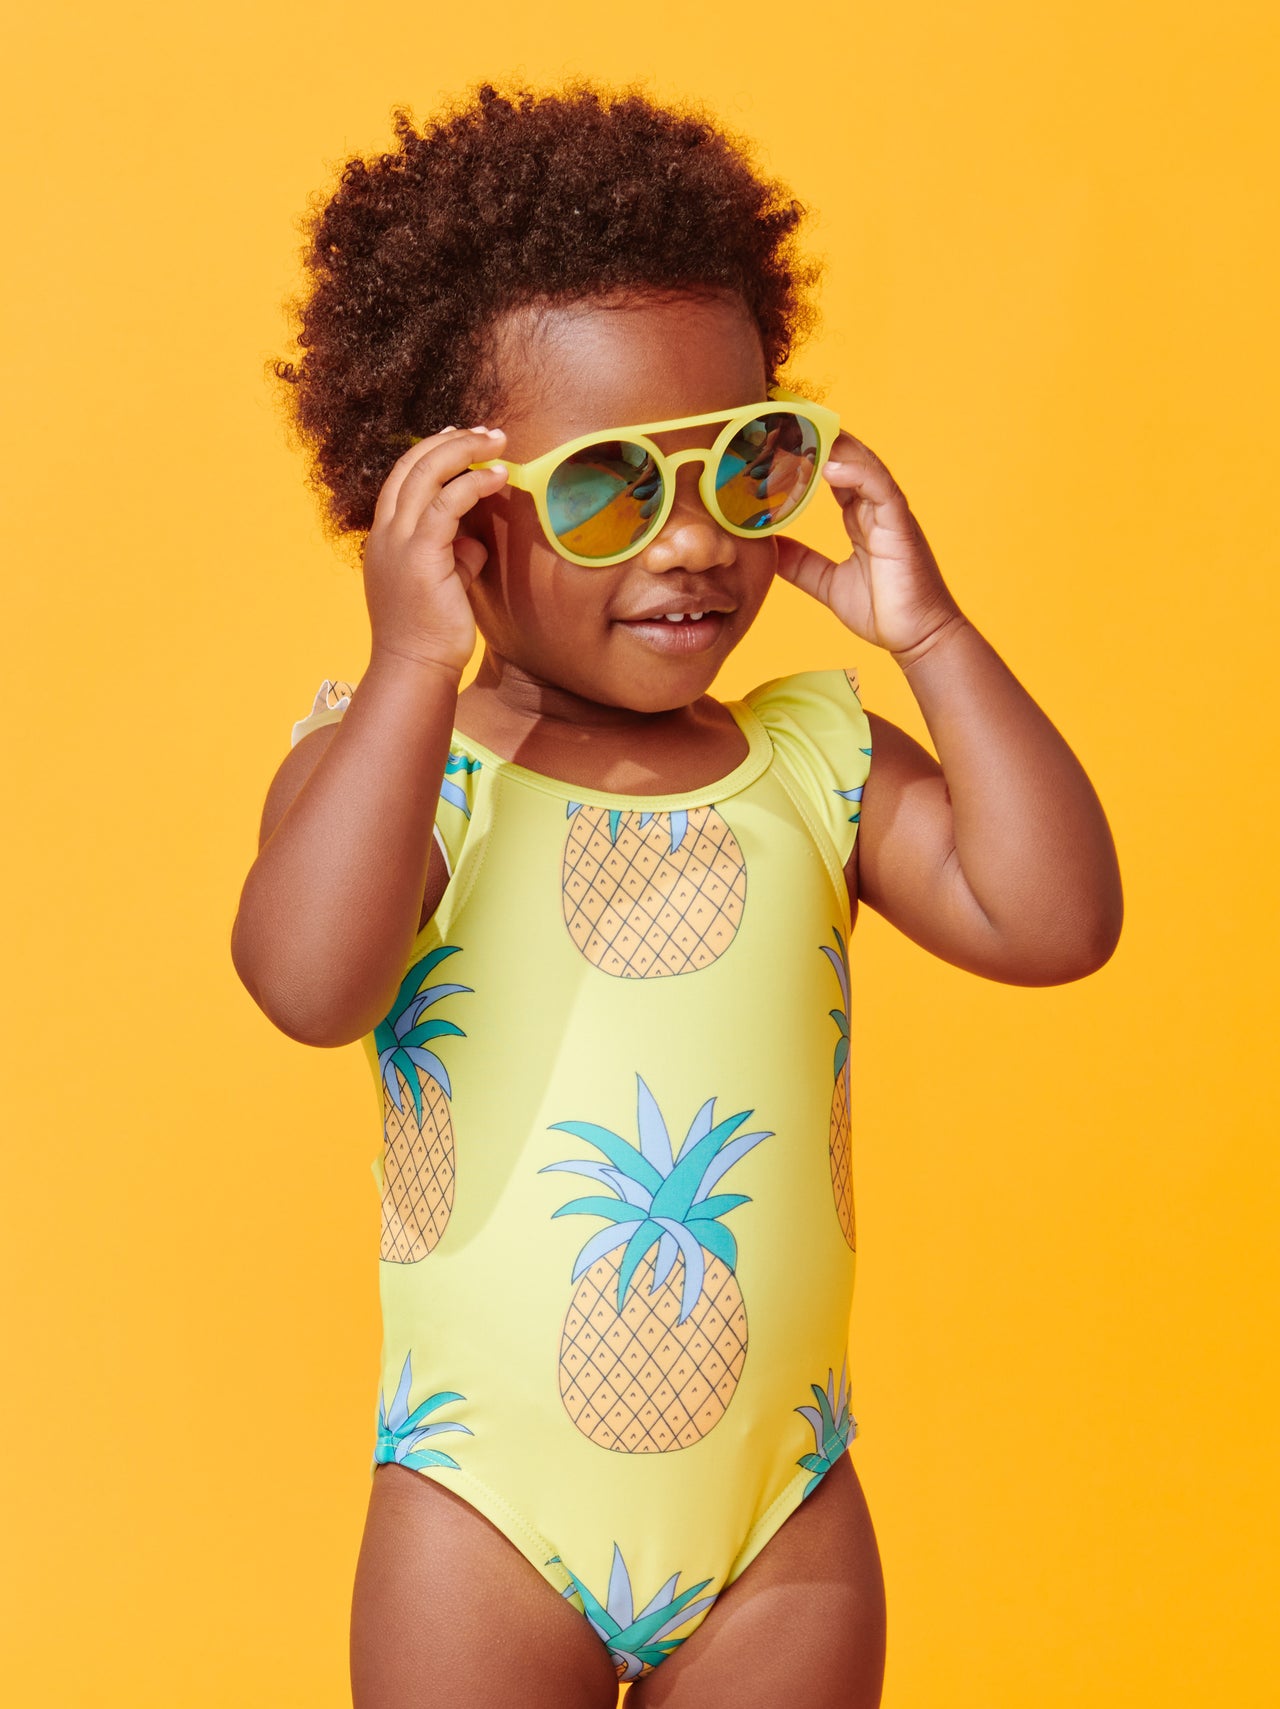 One Piece Baby Swimsuit- Pineapple Parade in Yellow